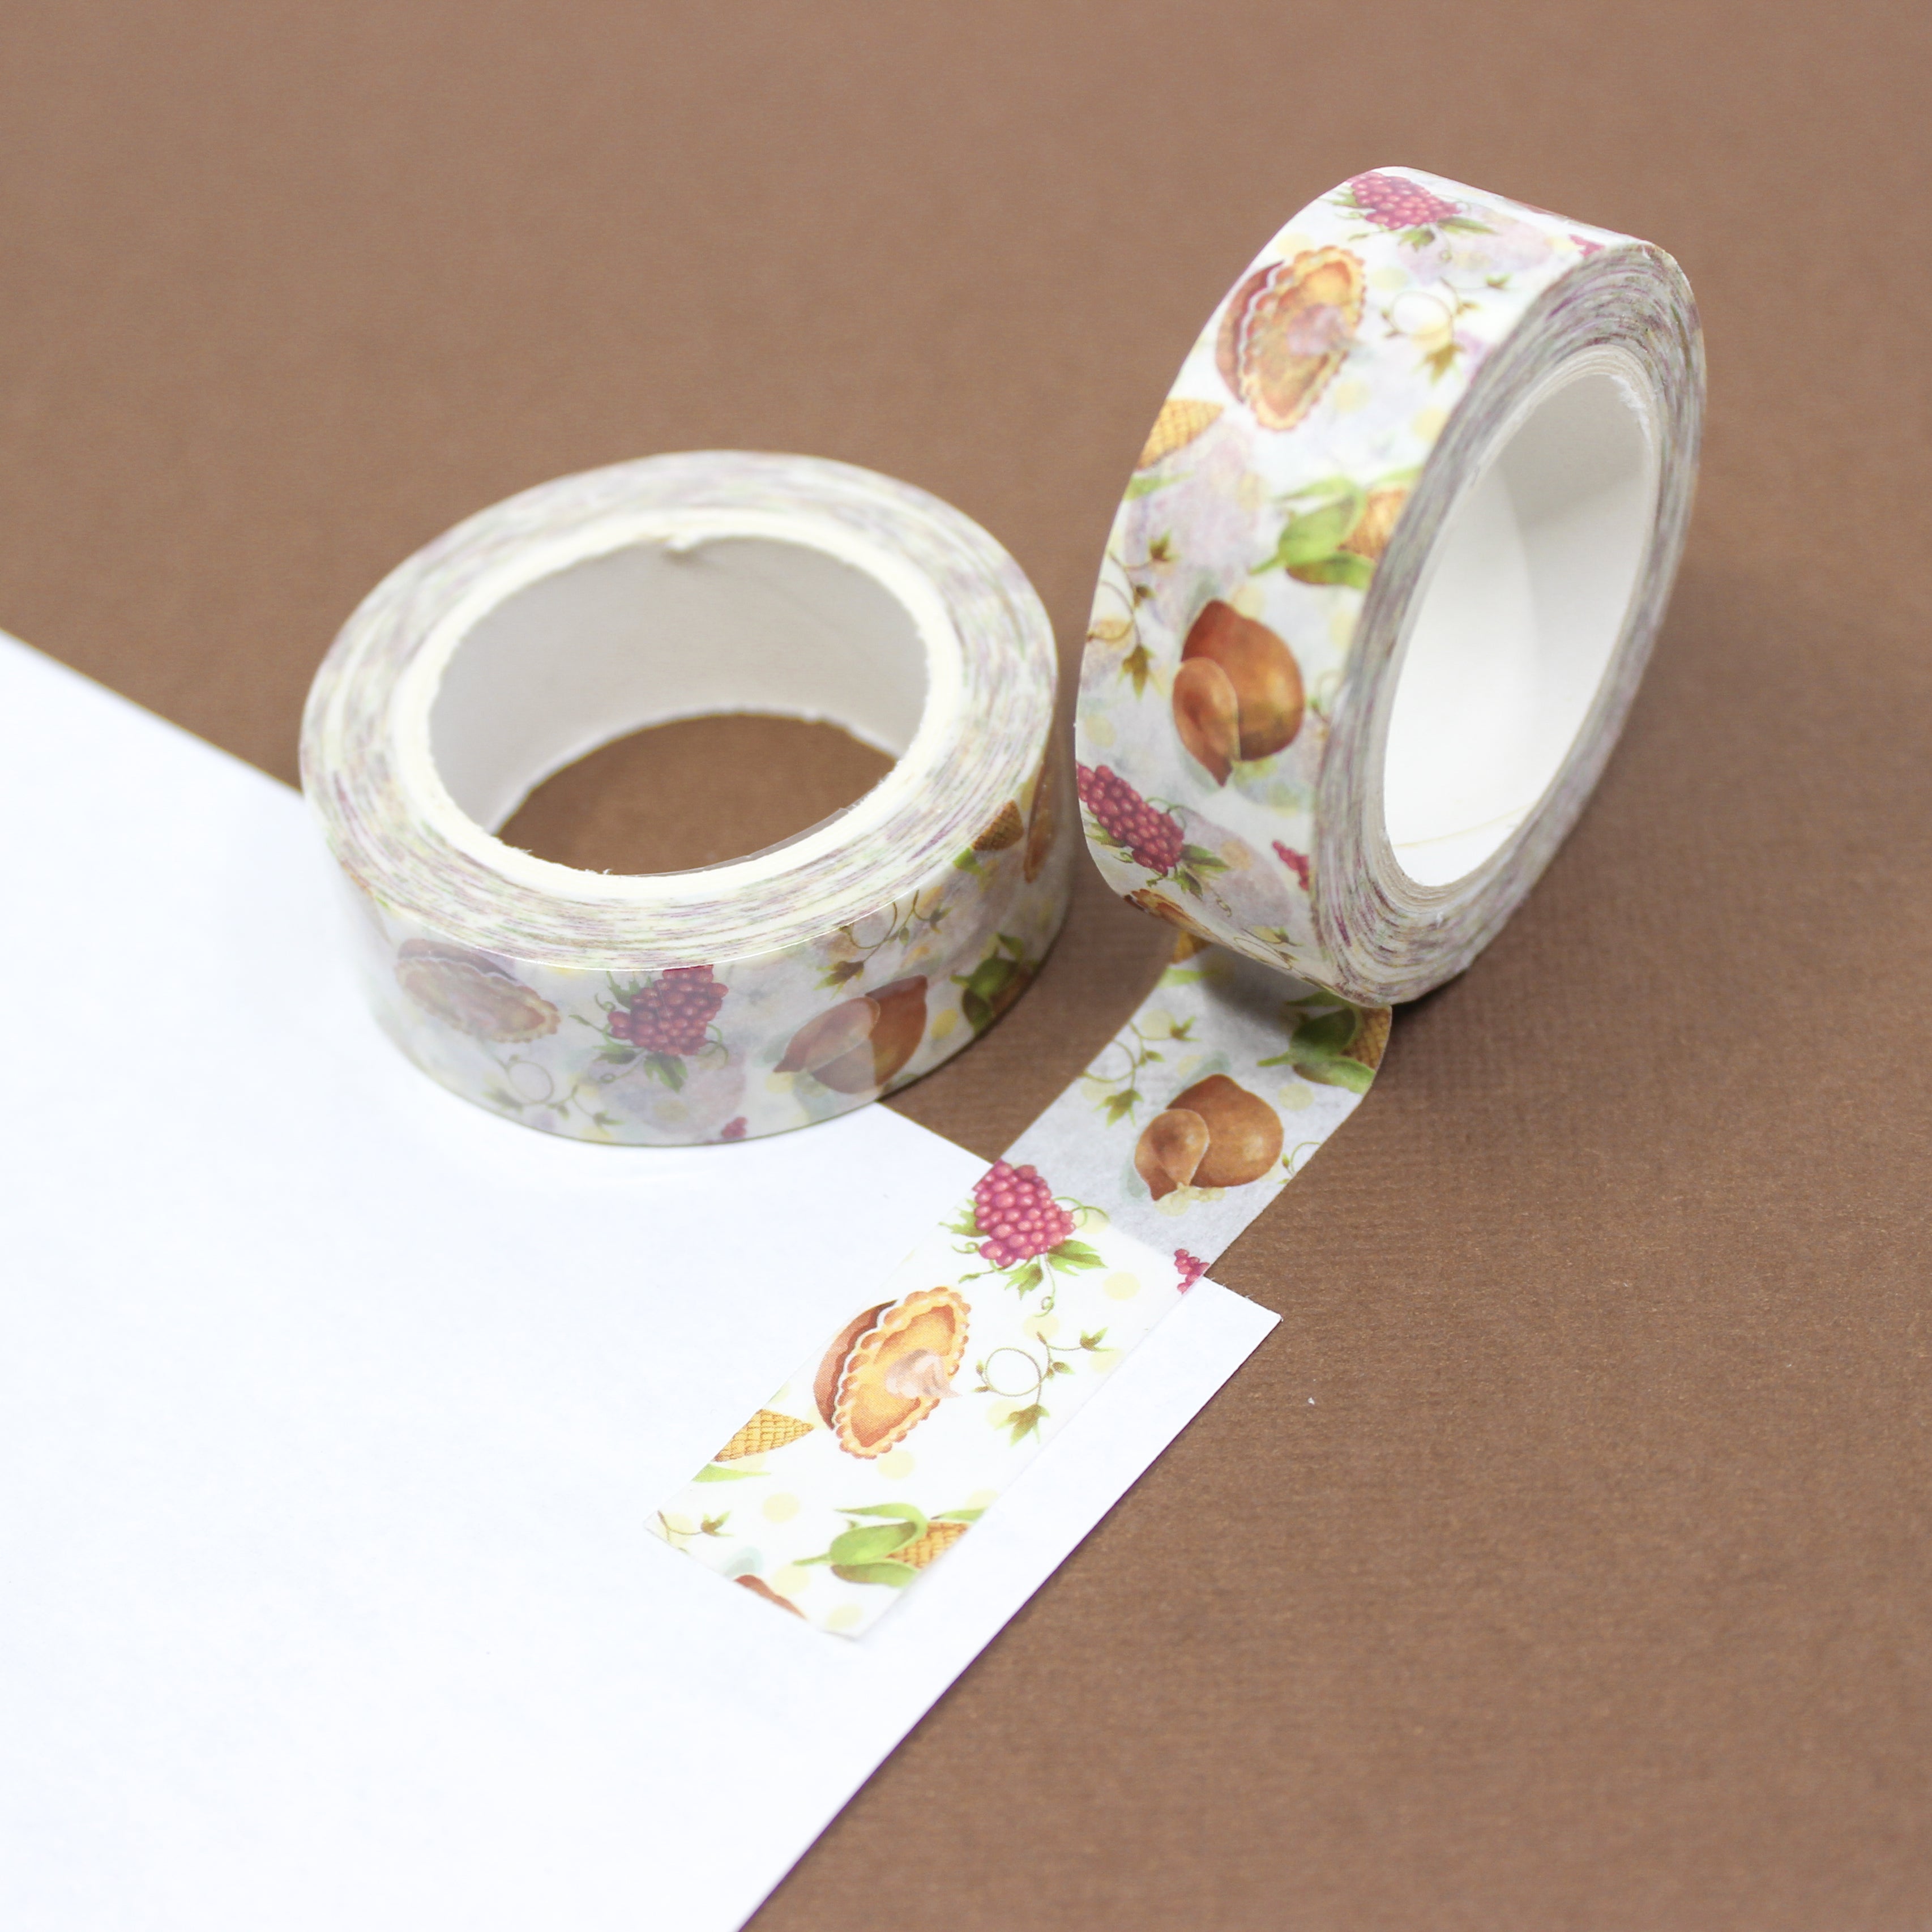 This is a delicious turkey pie view themed washi tape from BBB Supplies Craft Shop